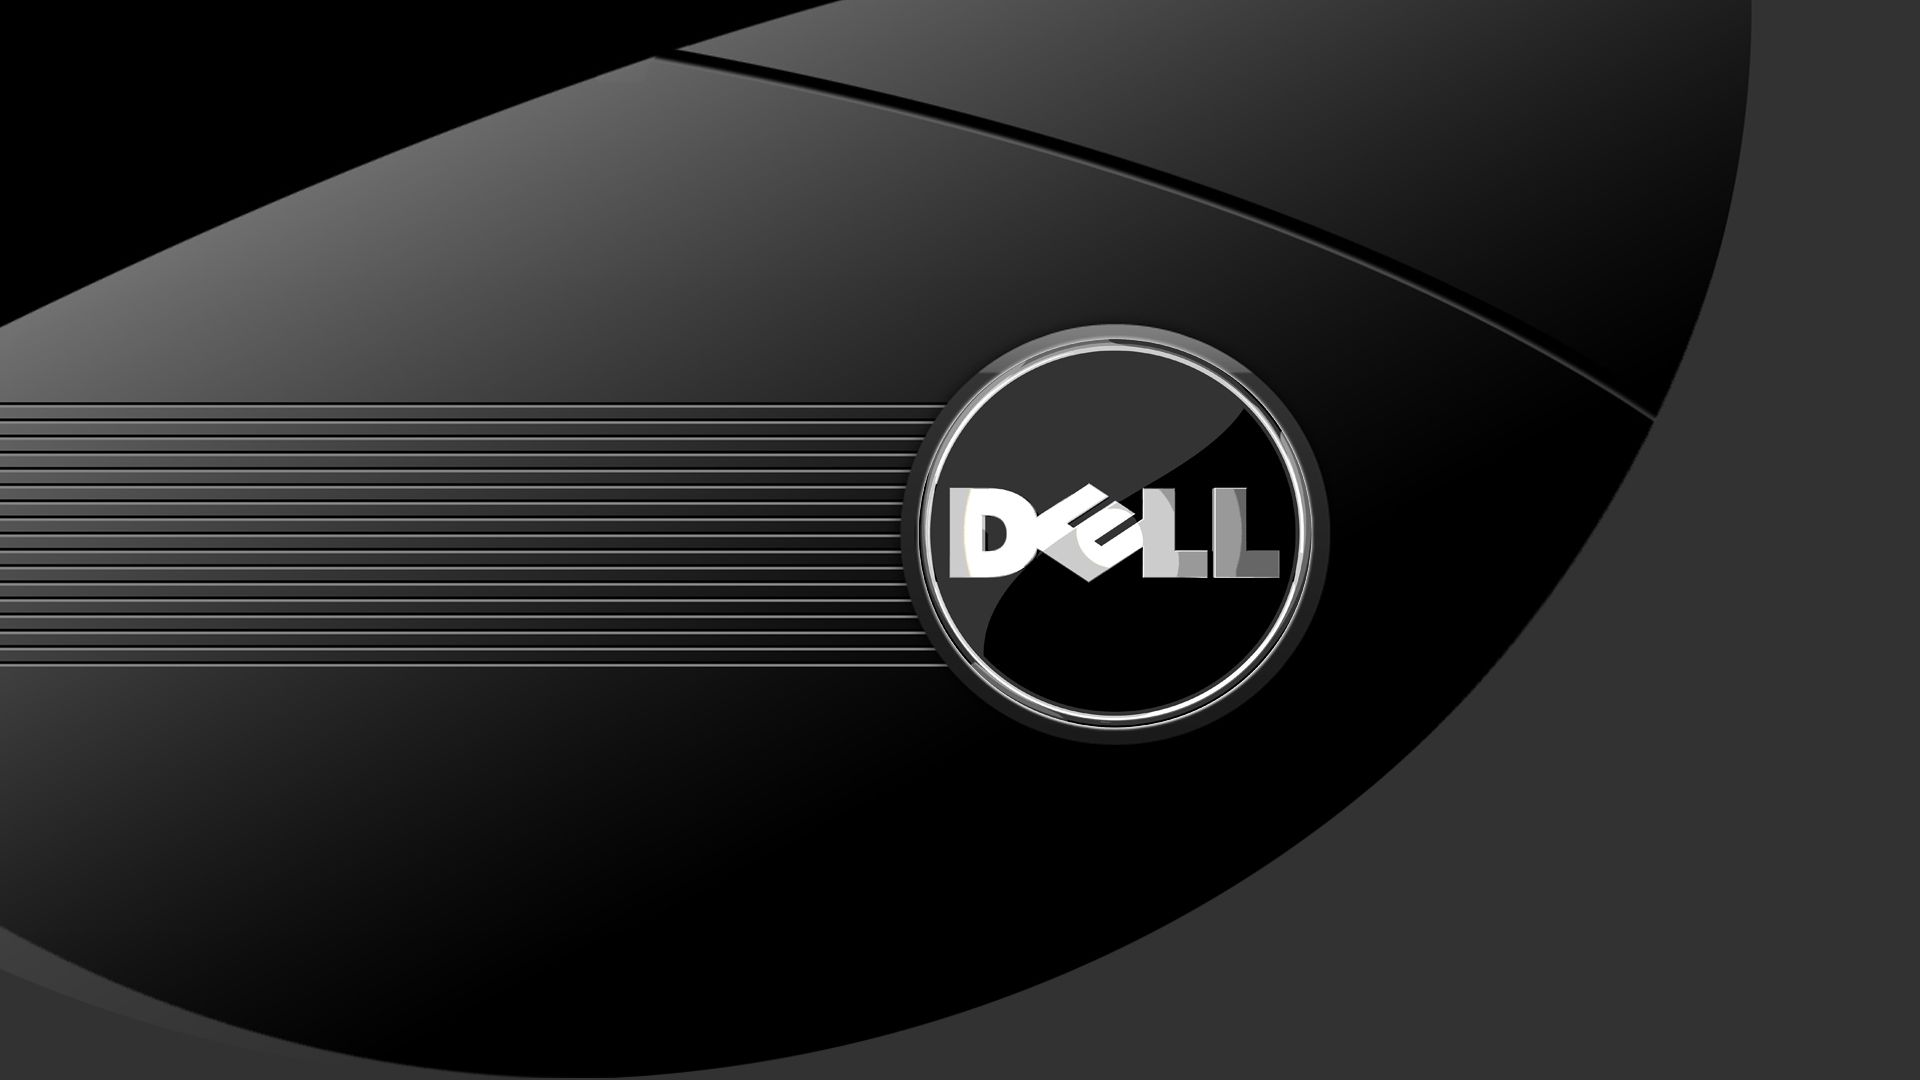 Dell wallpapers